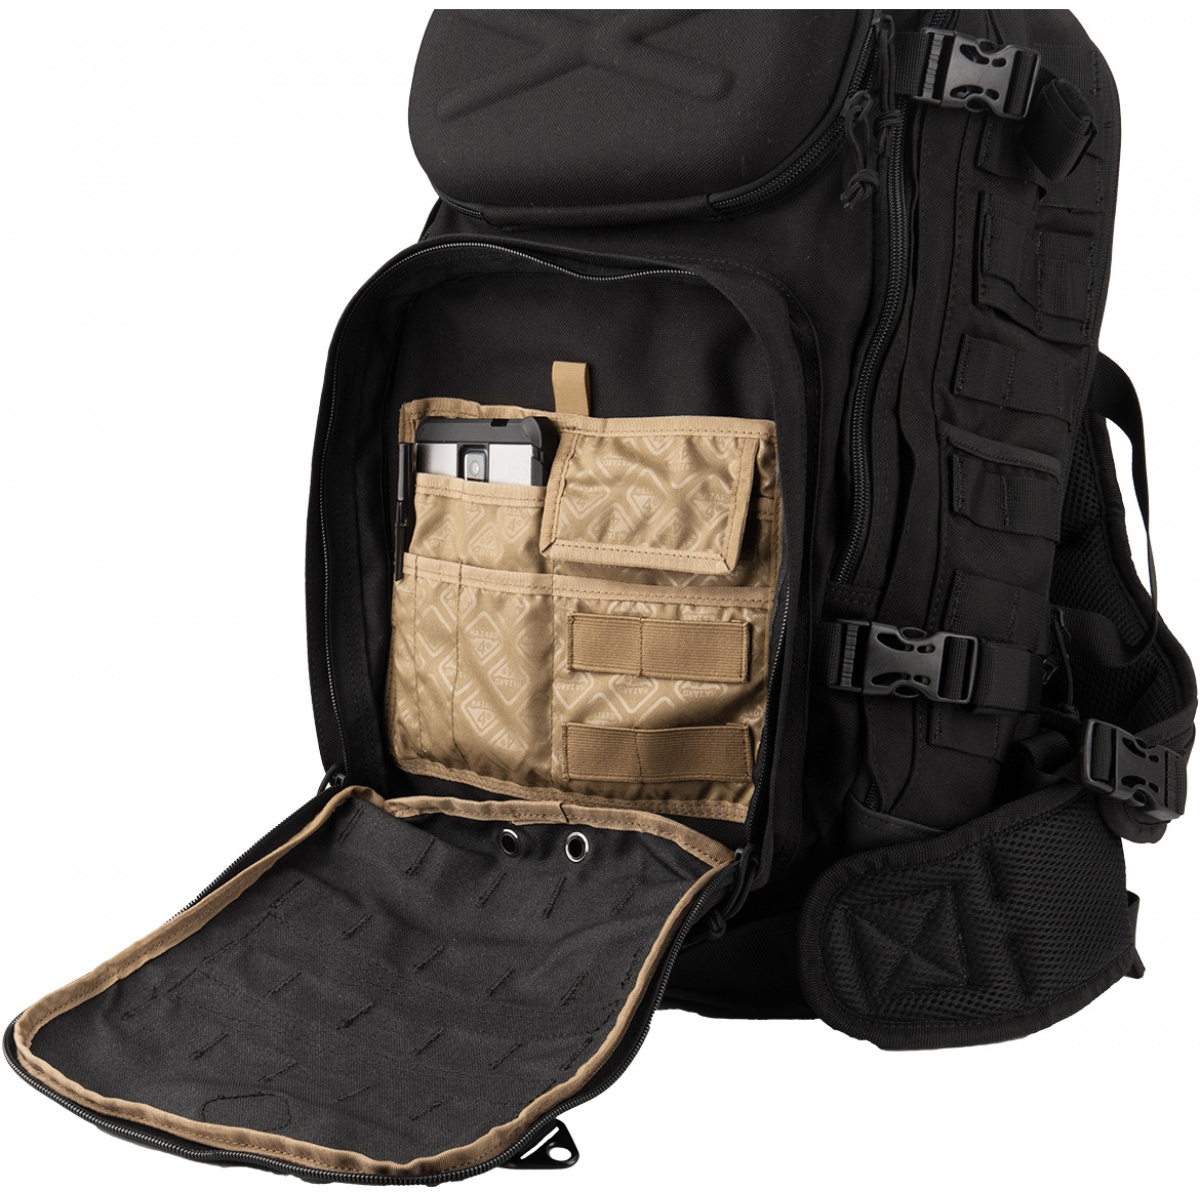 Hazard 4 Tactical MOLLE Patrol Thermo-Cap Daypack - BLACK